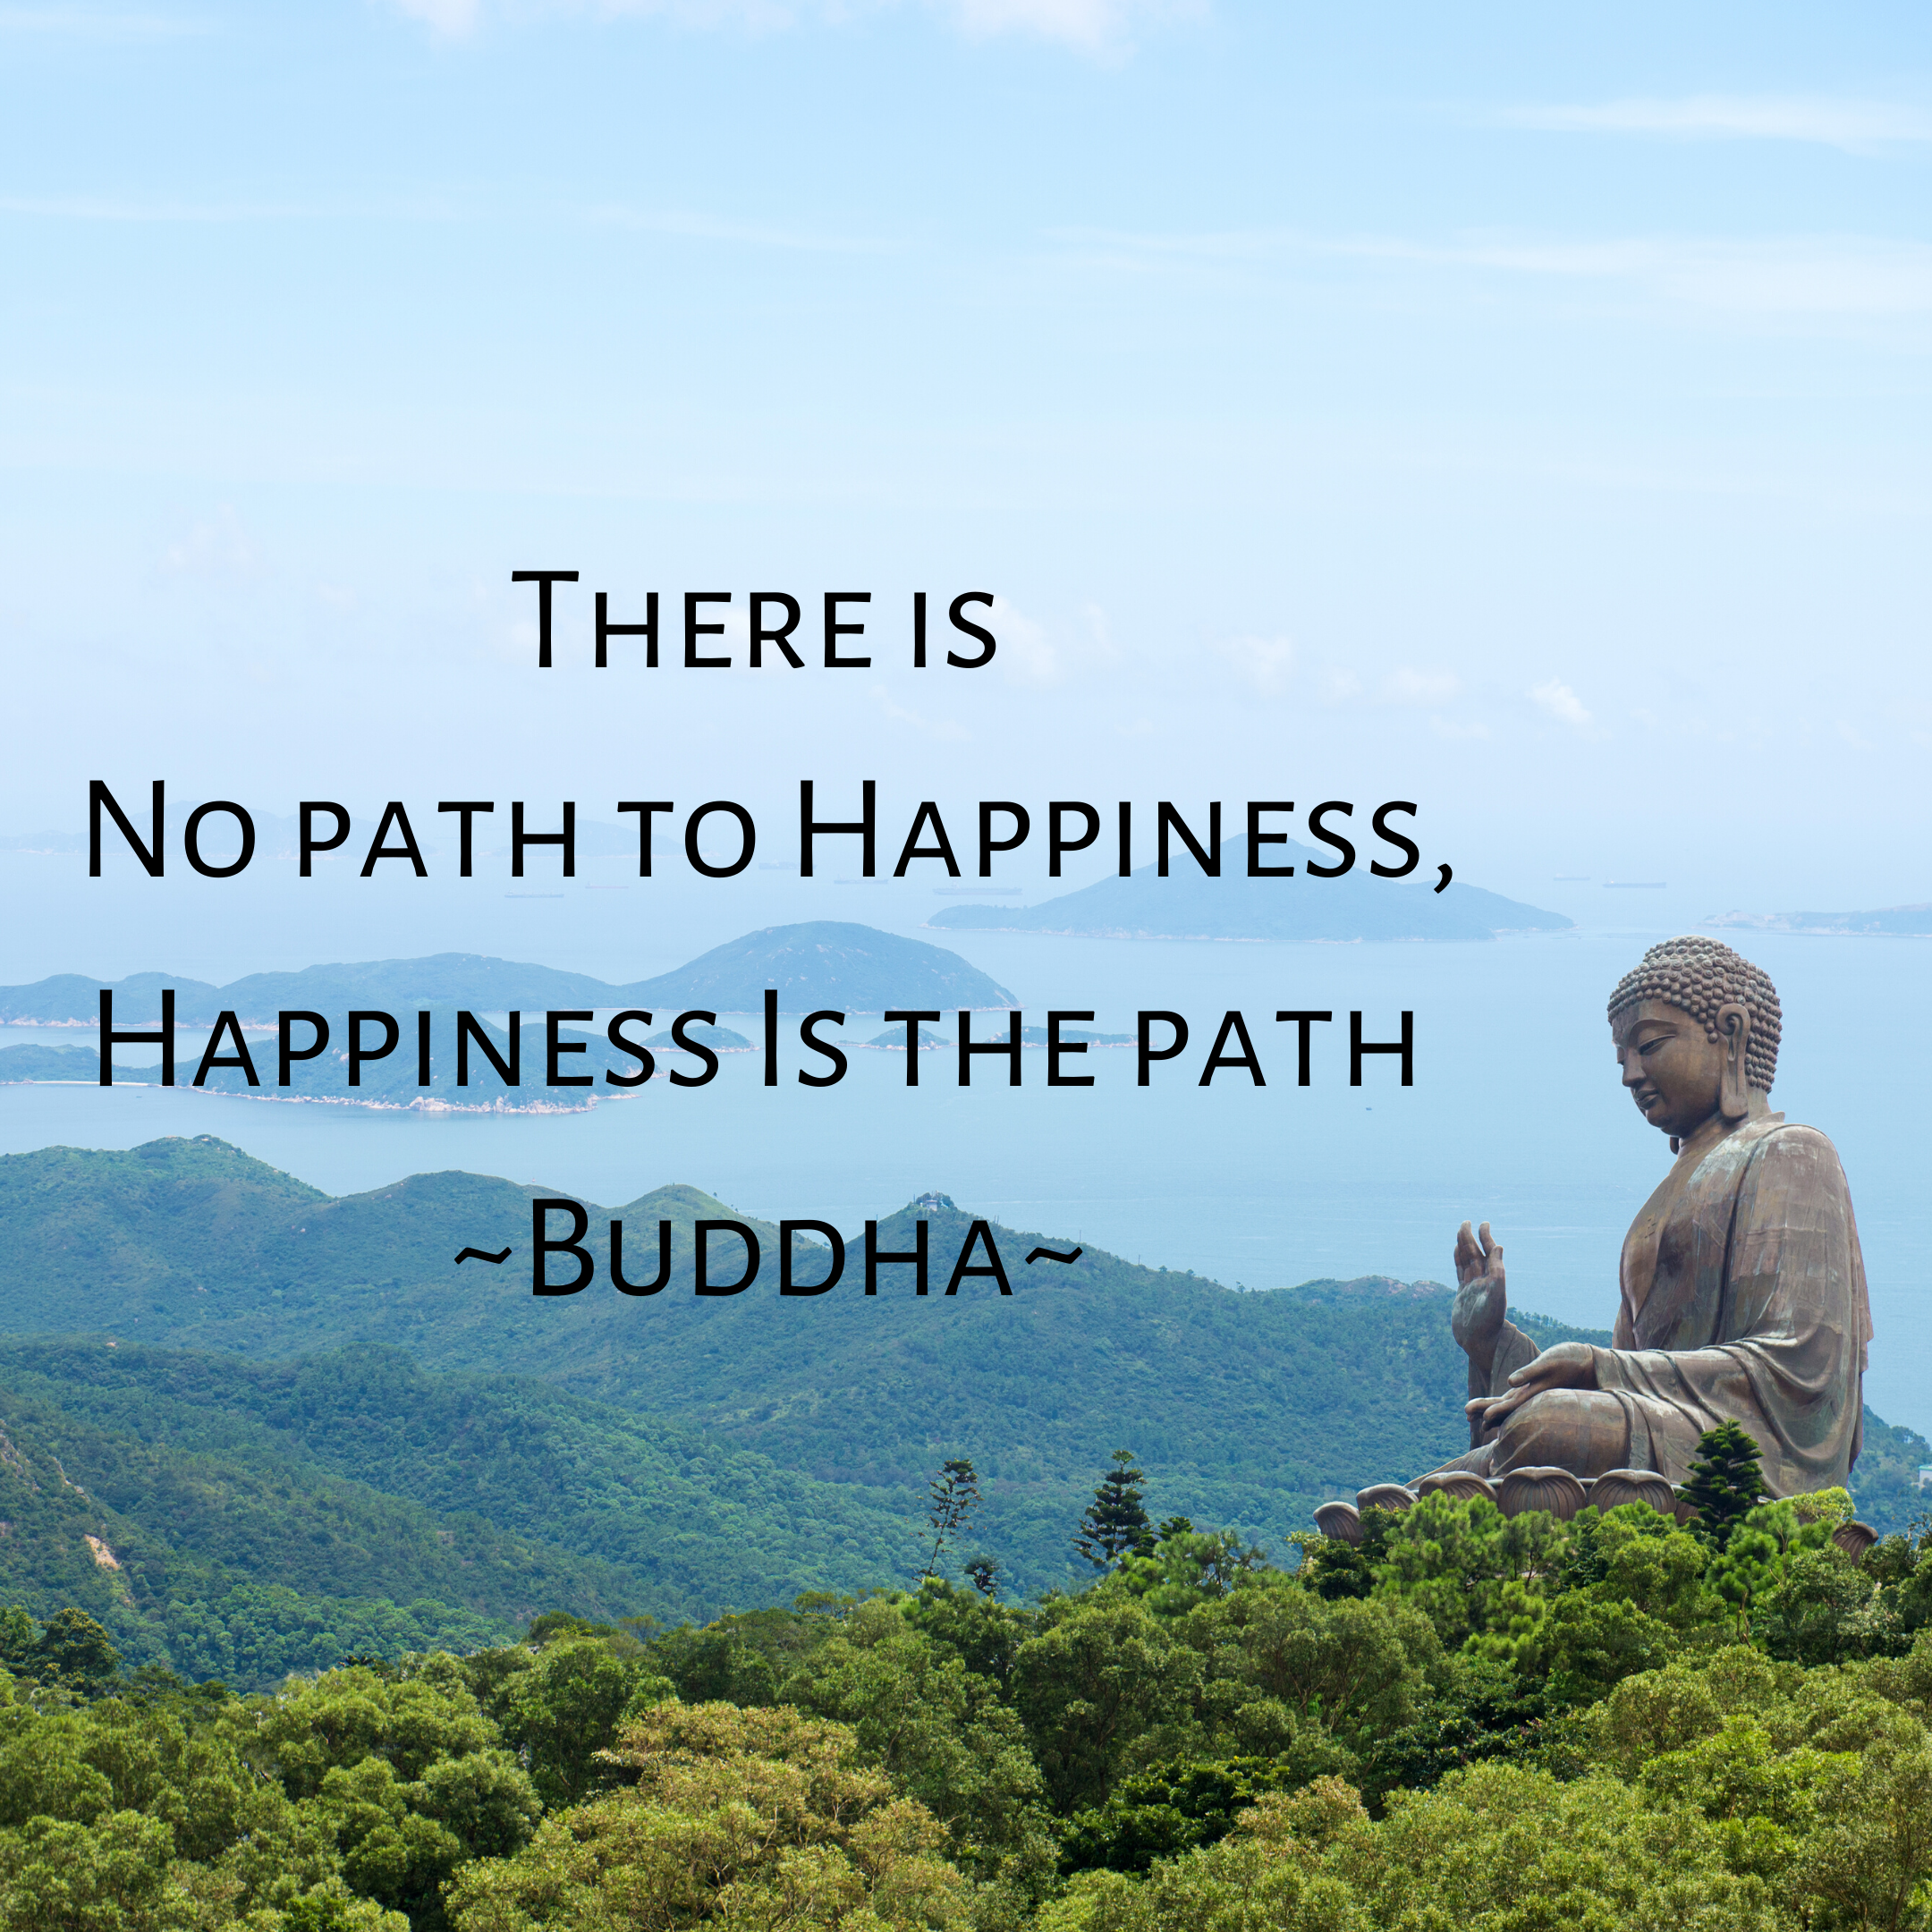 the-is-no-path-to-happiness-happiness-is-the-path-buddha-mindfulness-tips-with-good-looks-bible-glb-be-jehan-mir